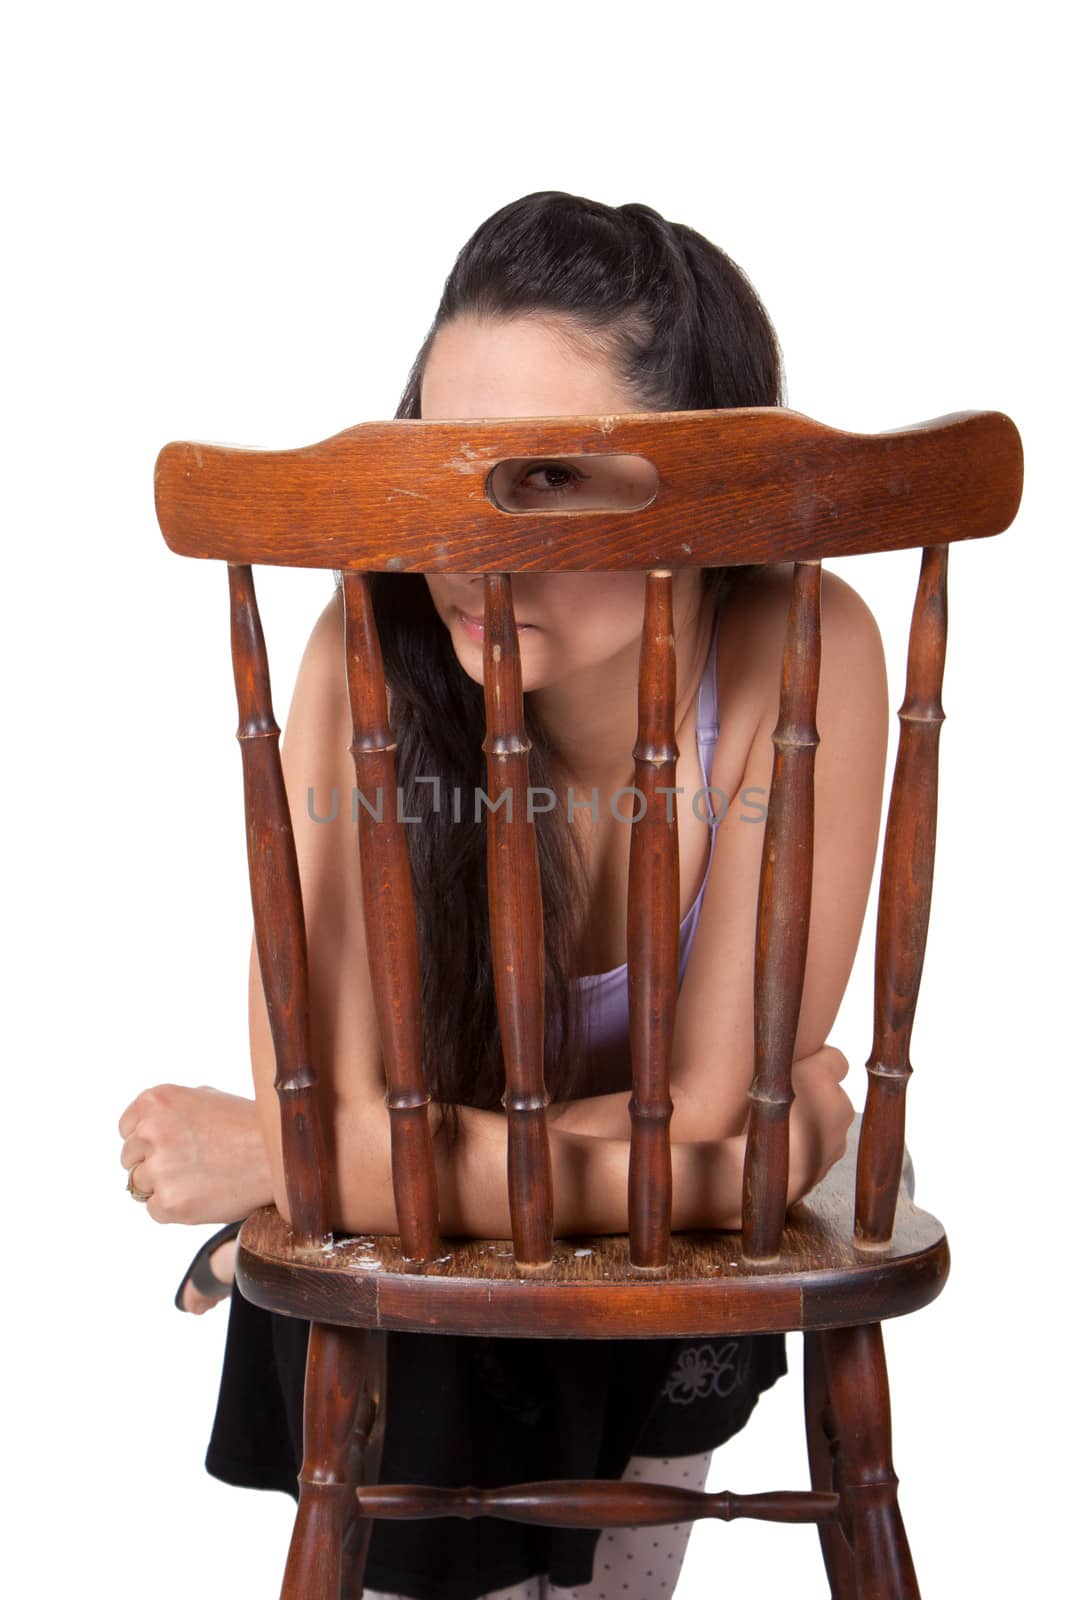 Long-haired brunette woman relies on a chair, is hidden; looking with one eye, isolated on a white background